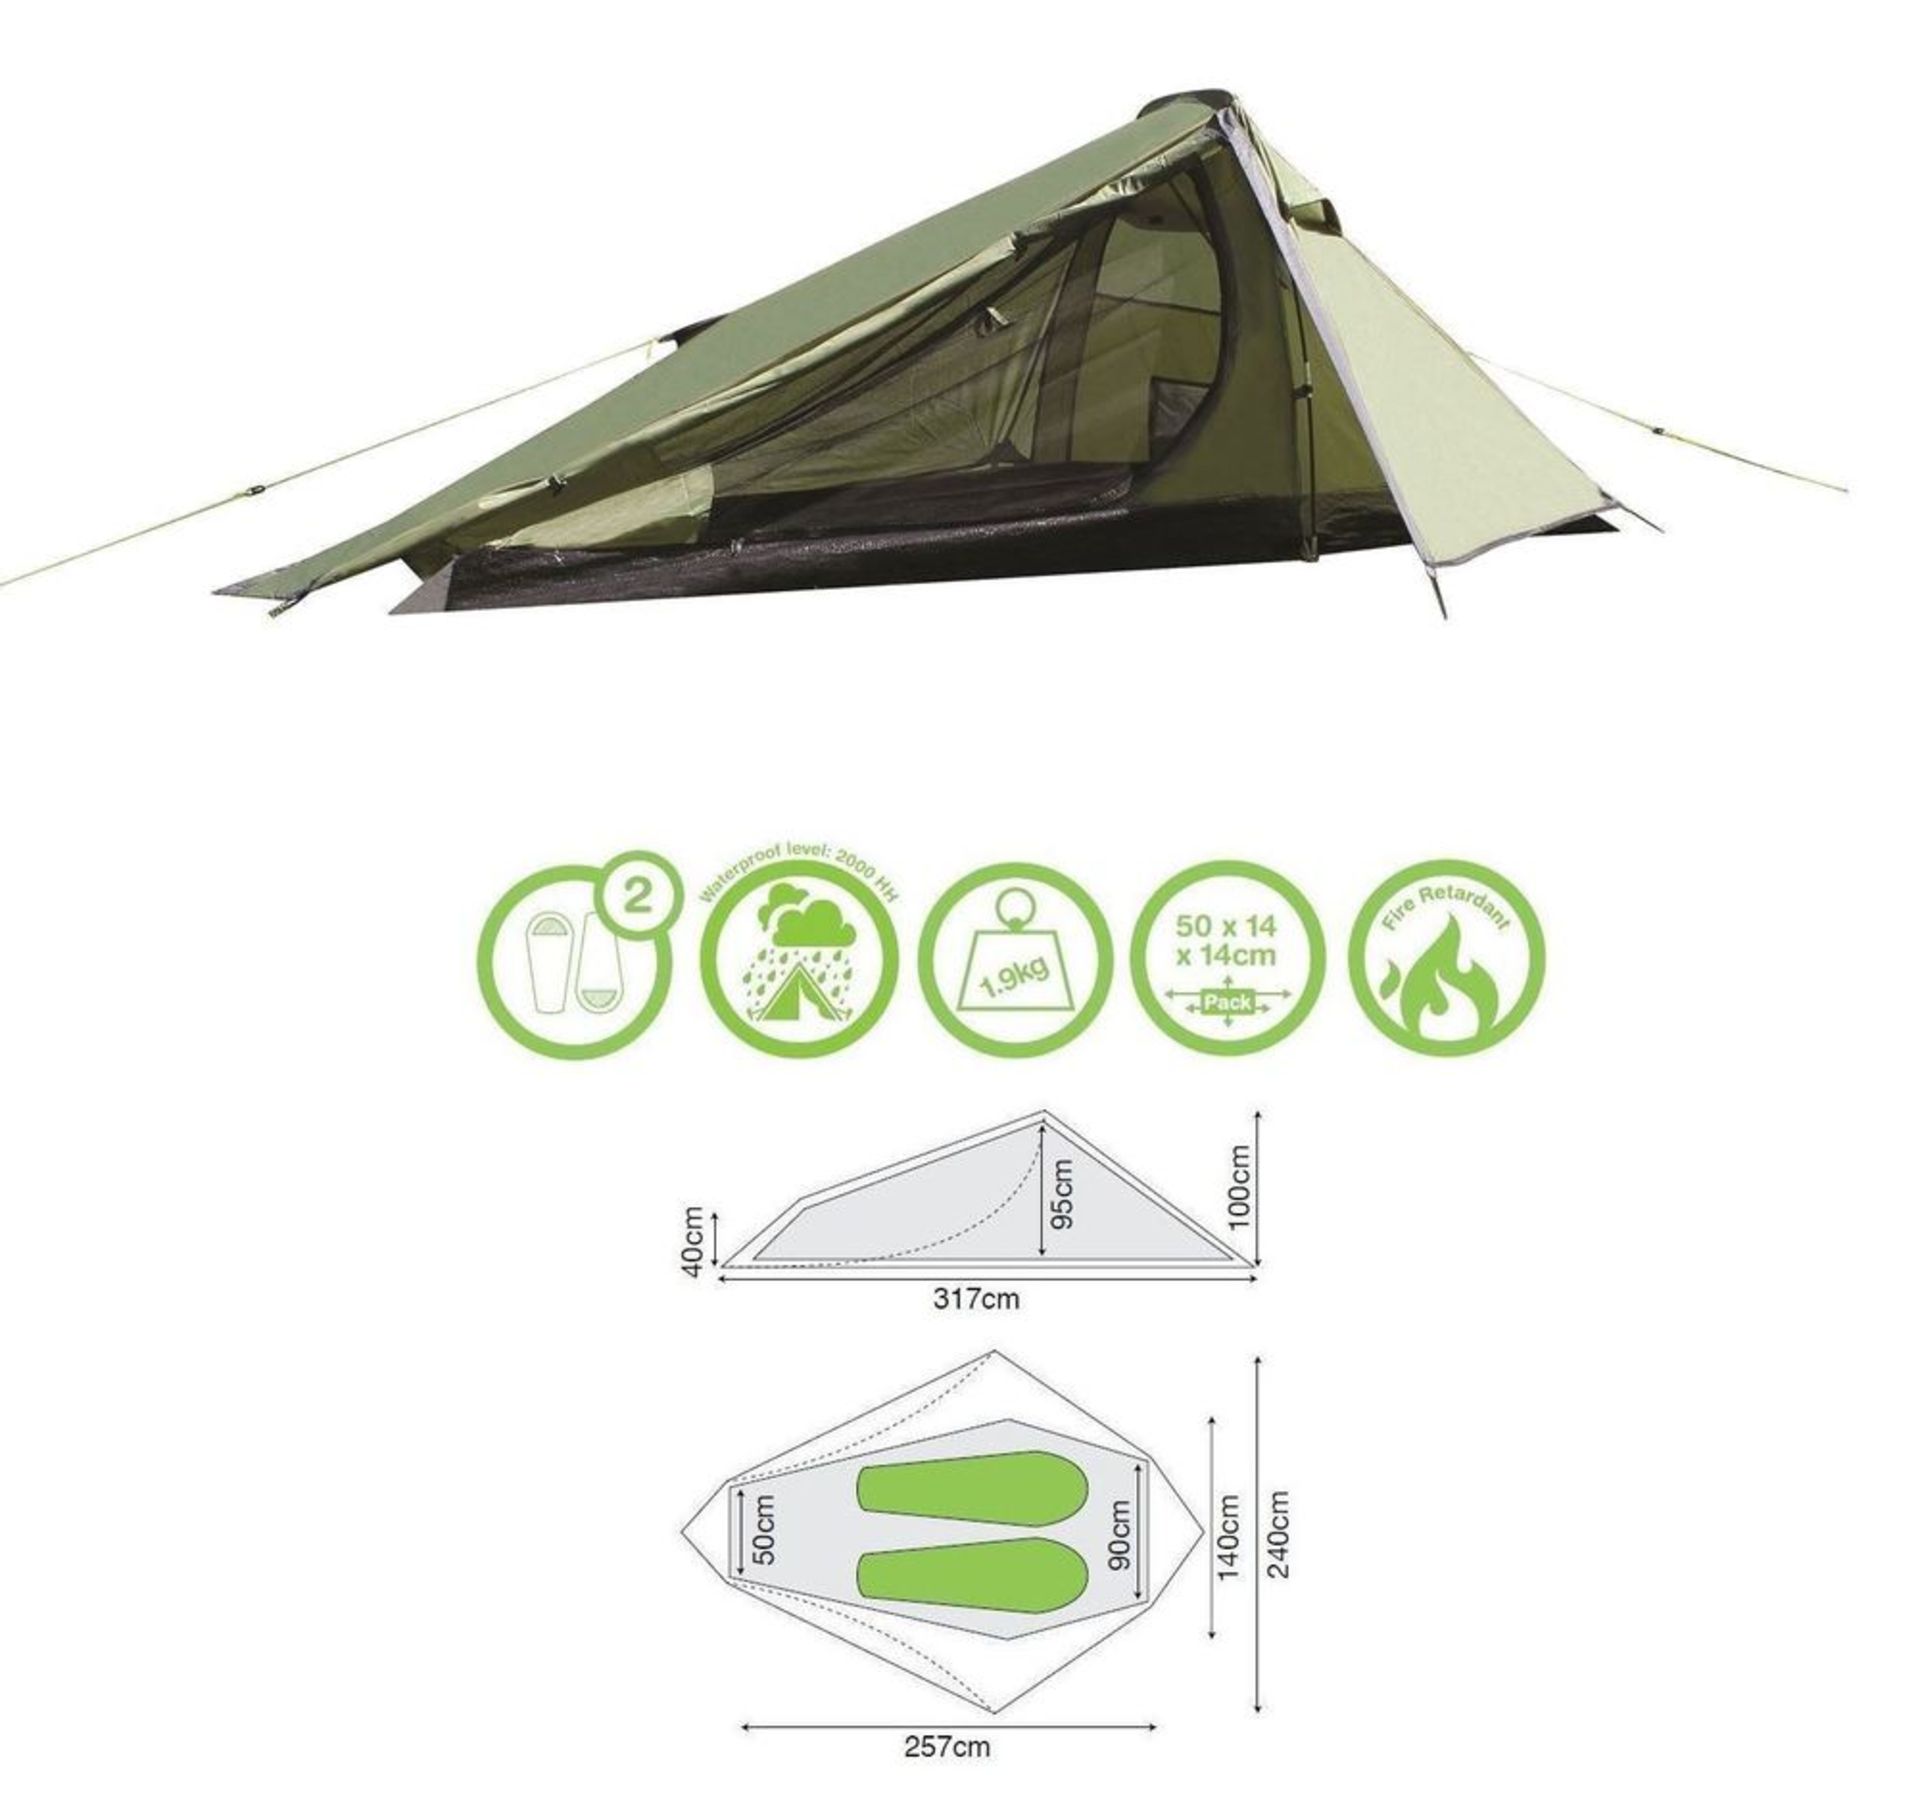 V Brand New Two Person Lightweight Tent In Bag - Easy to Pitch - Sewn in Groundsheet - Pre-